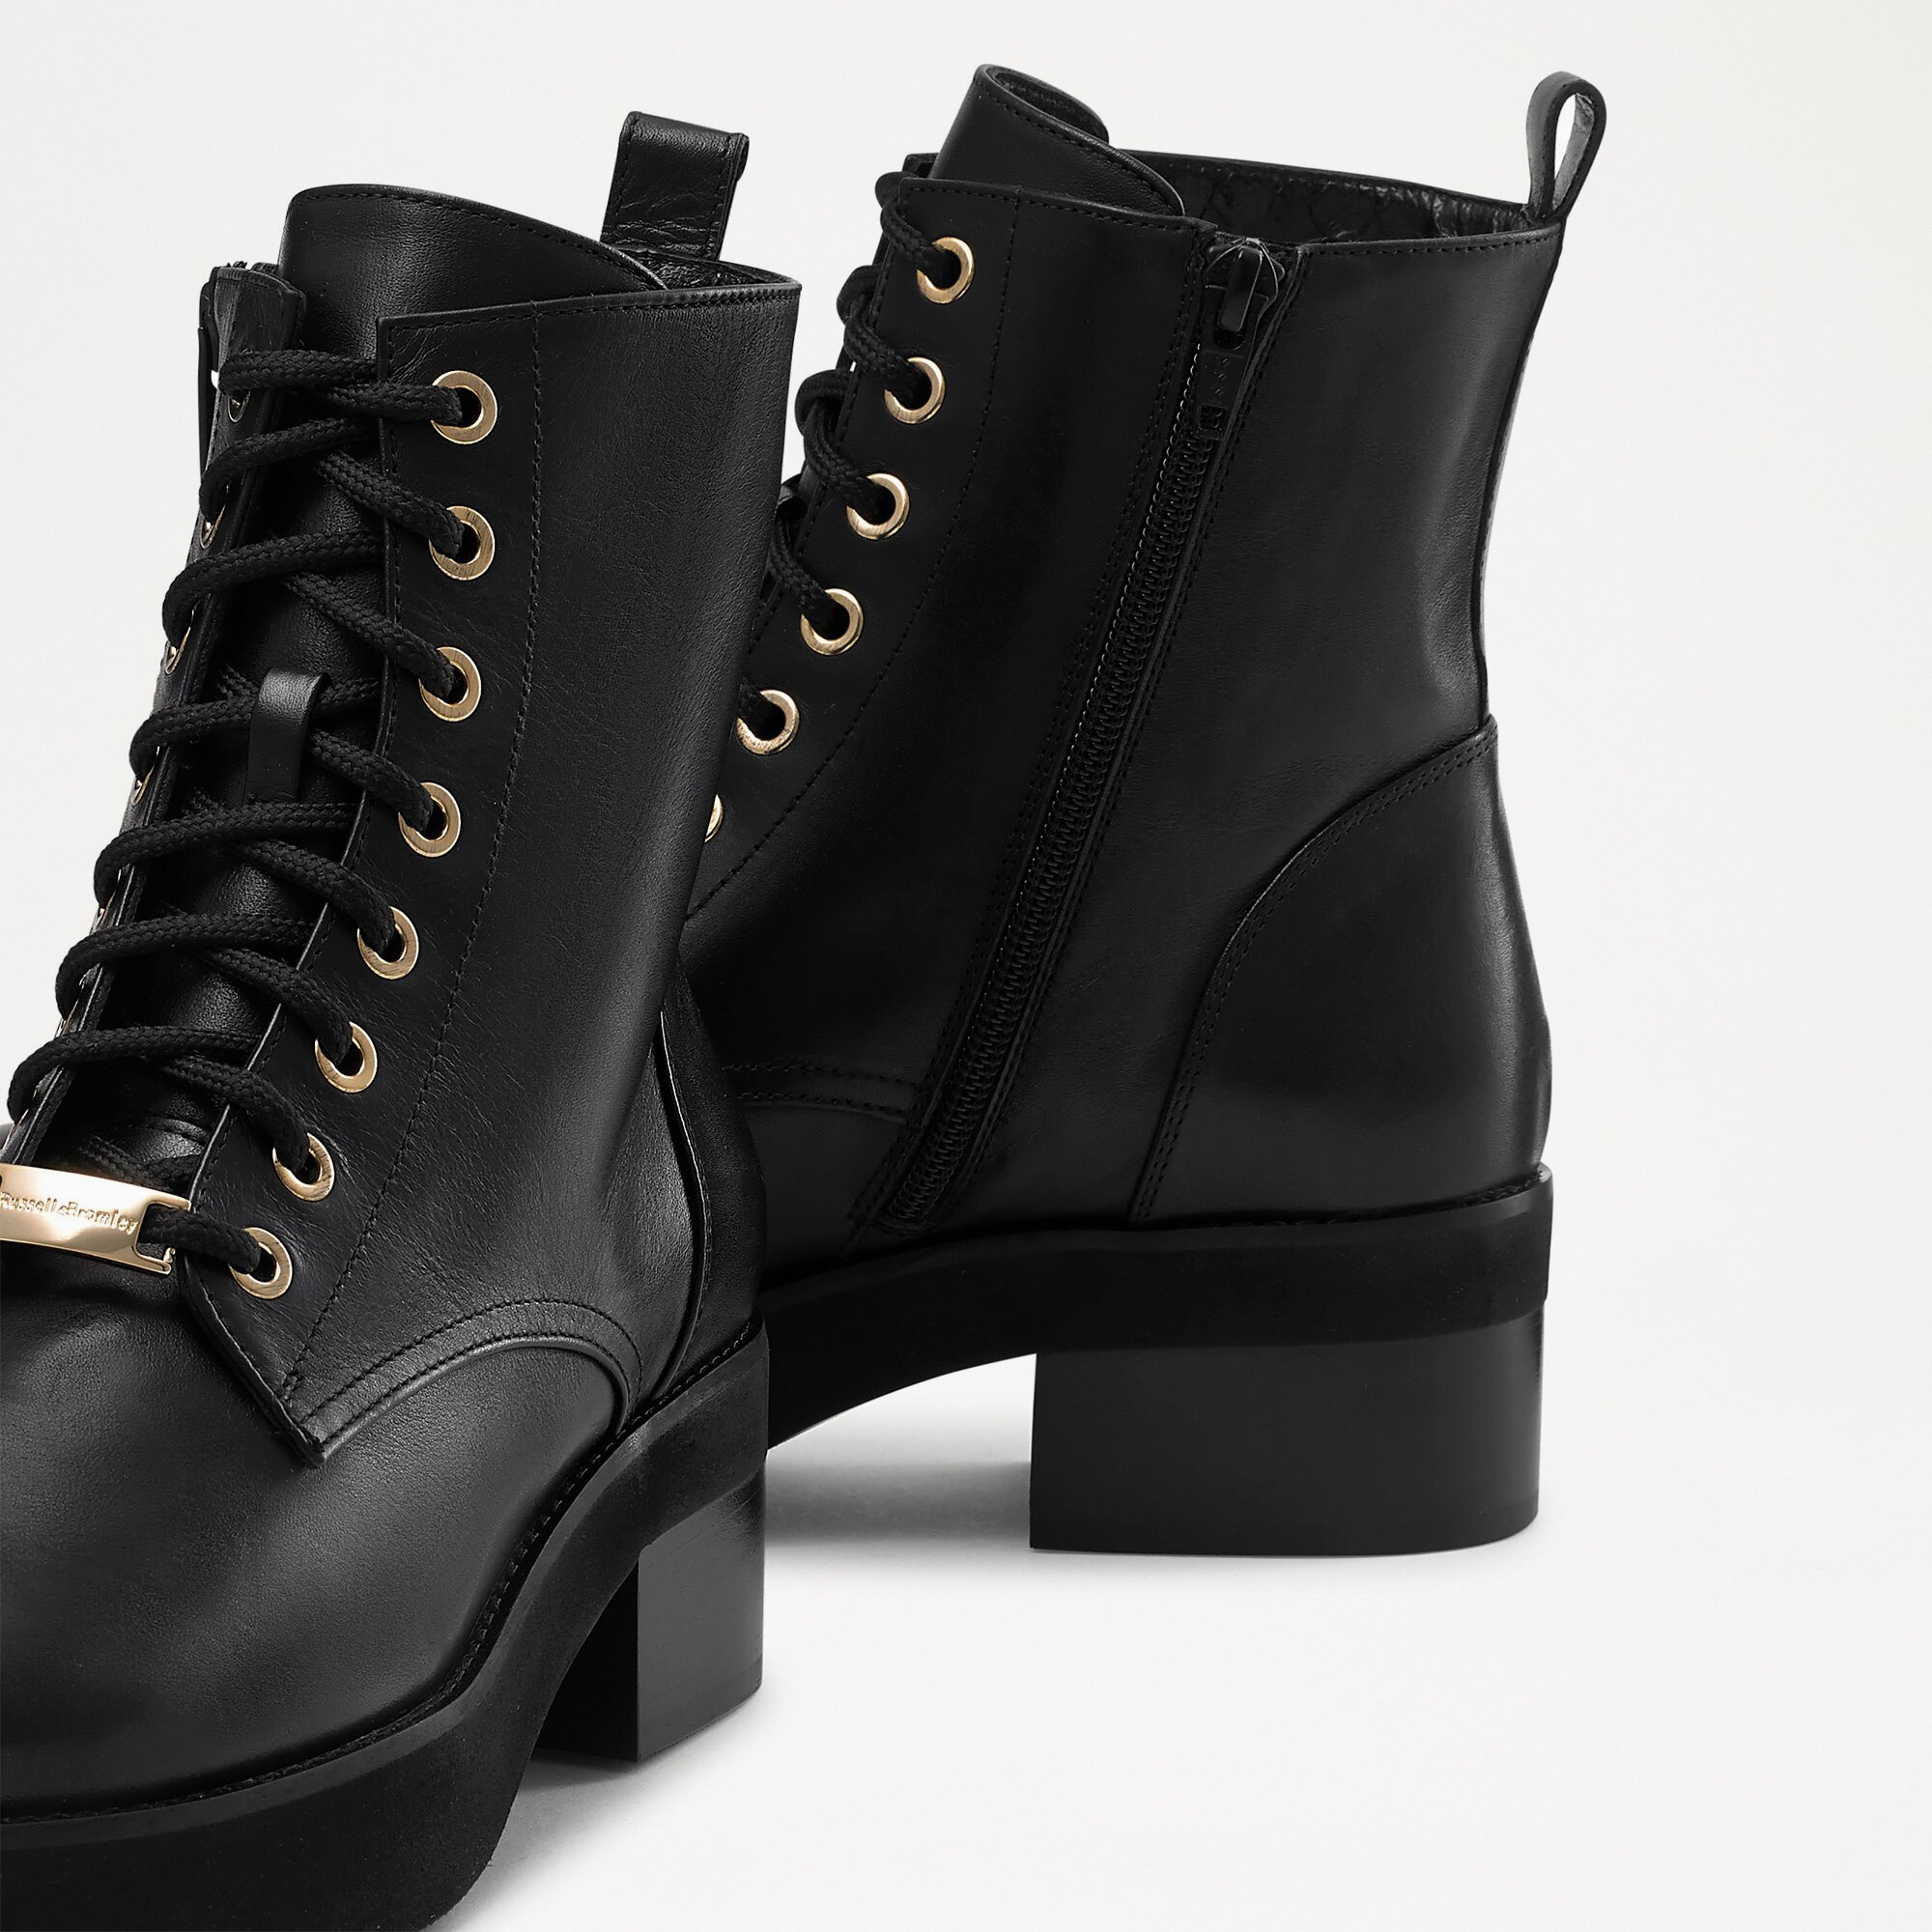 ATOM Lace-Up Ankle Boot in Black Calf | Russell & Bromley